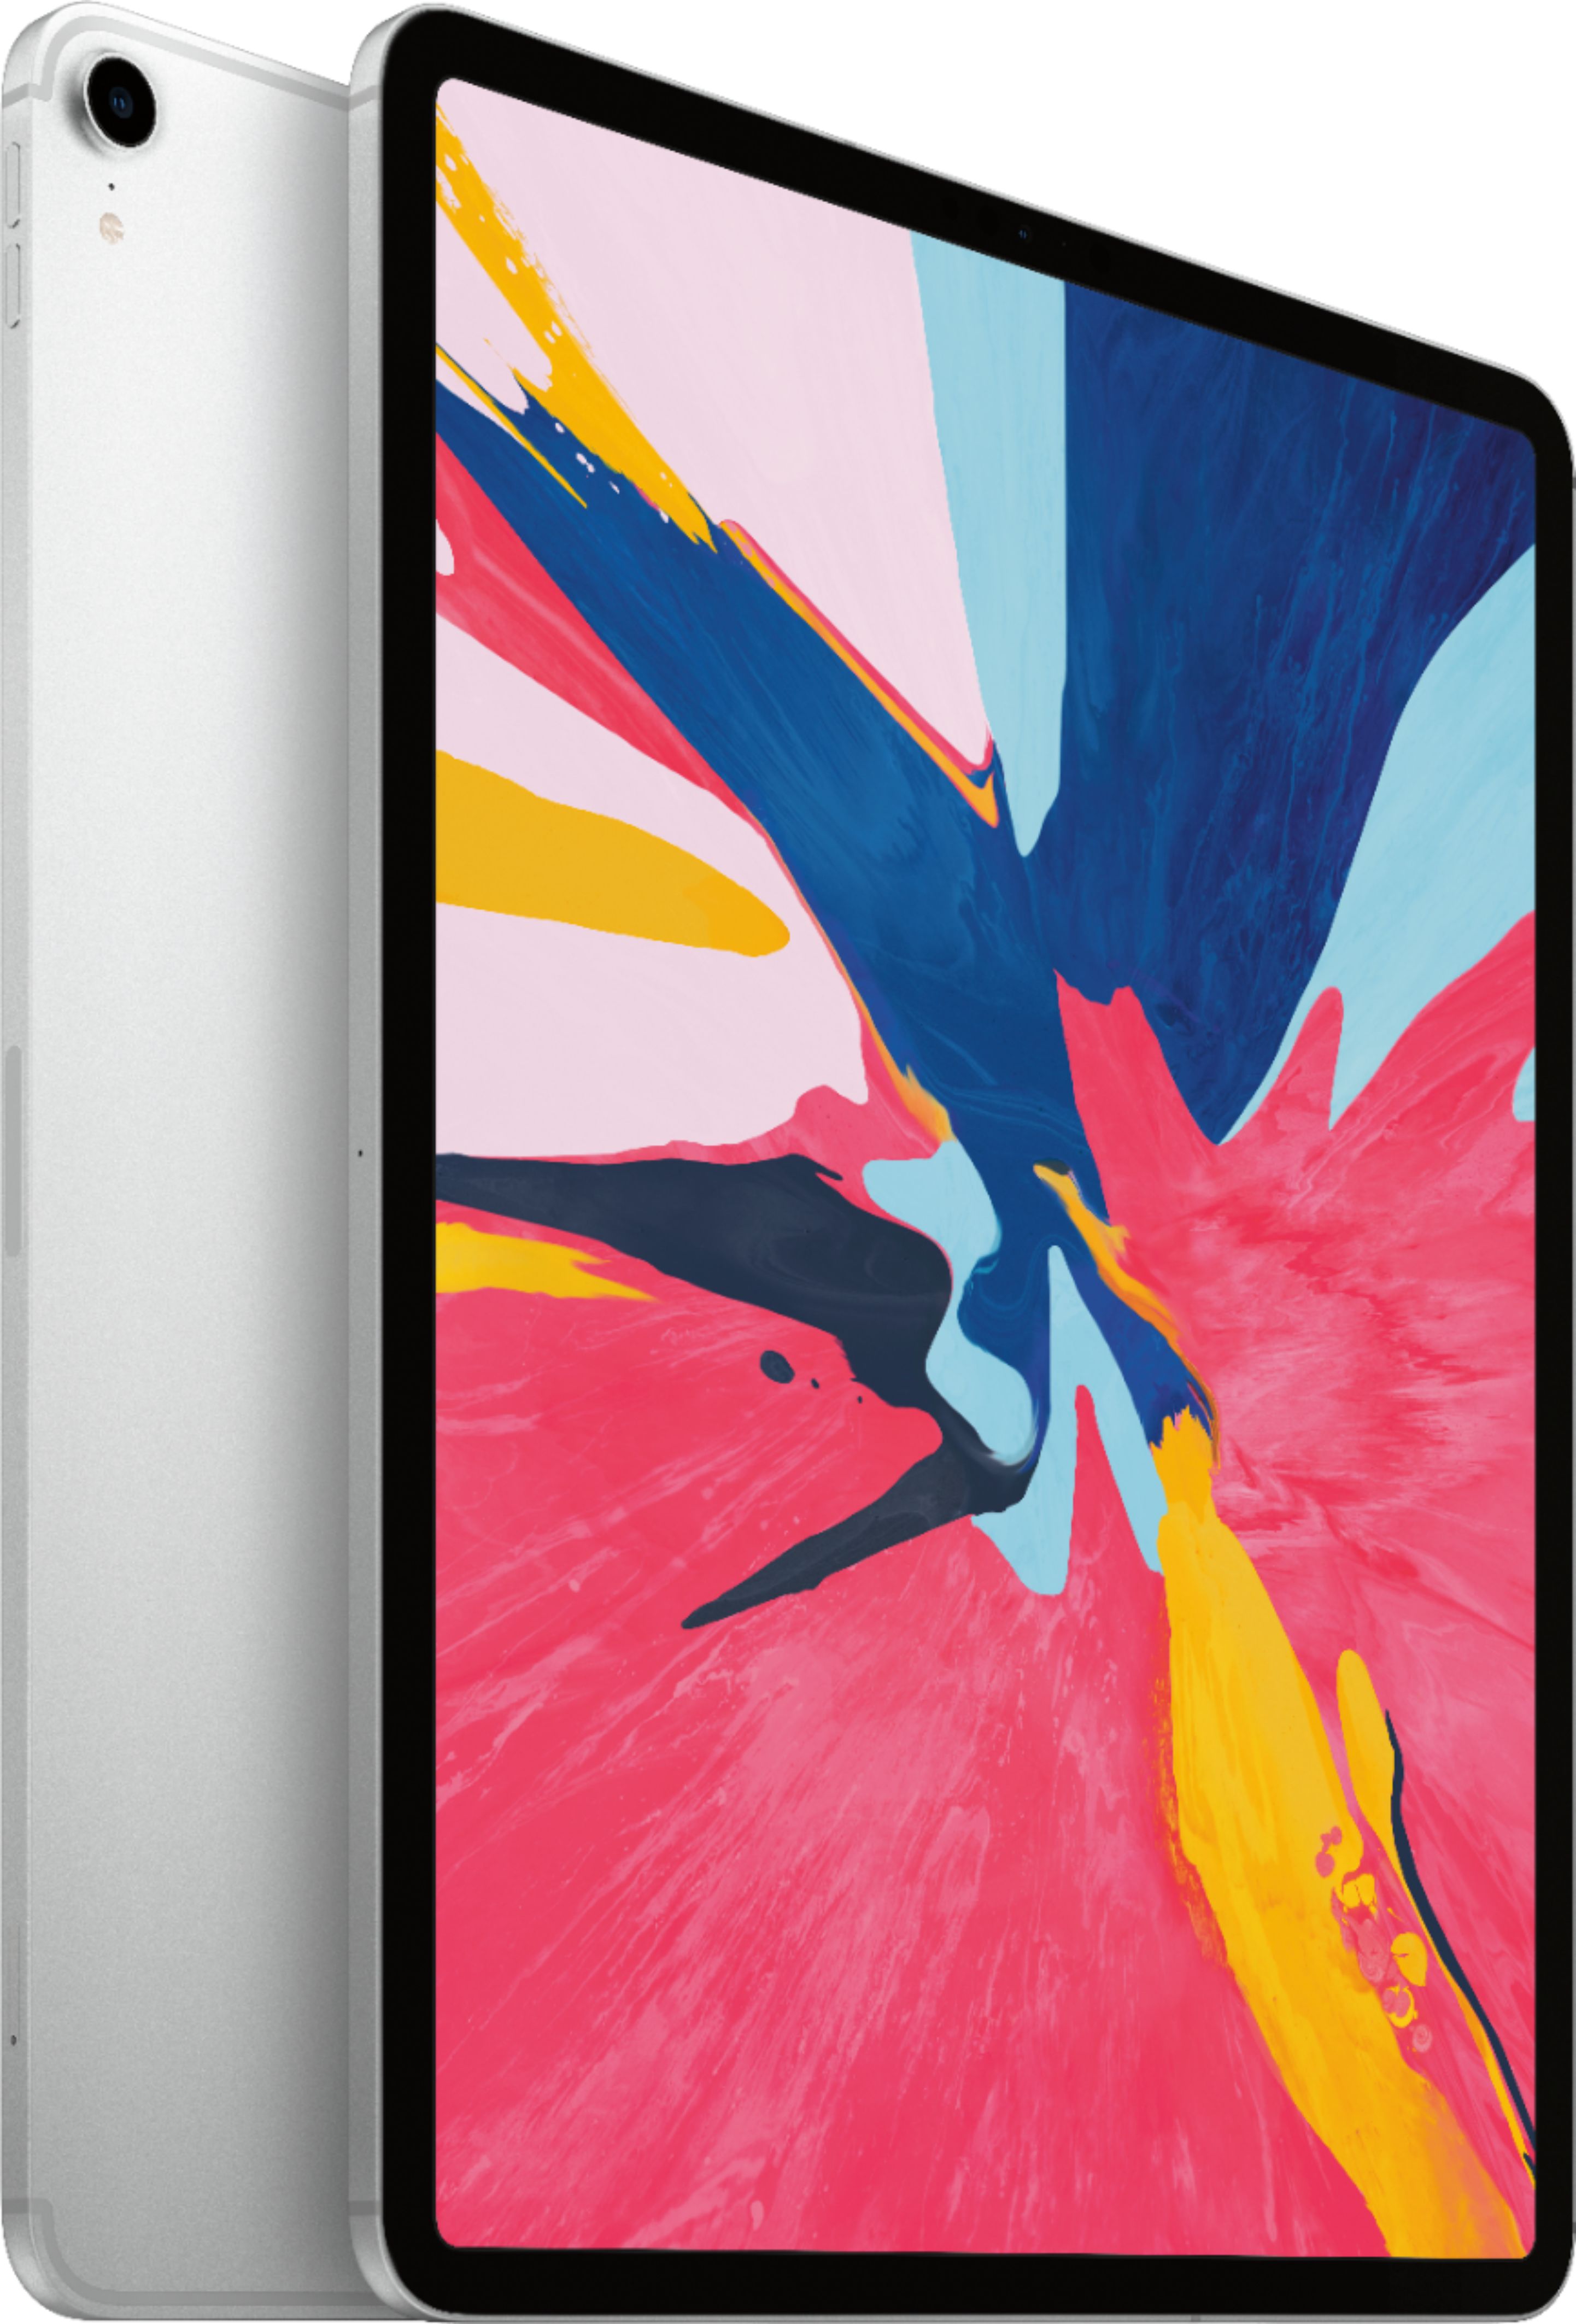 Angle View: Apple 12.9-inch iPad Pro (2020) Wi-Fi + Cellular 128GB - Space Gray